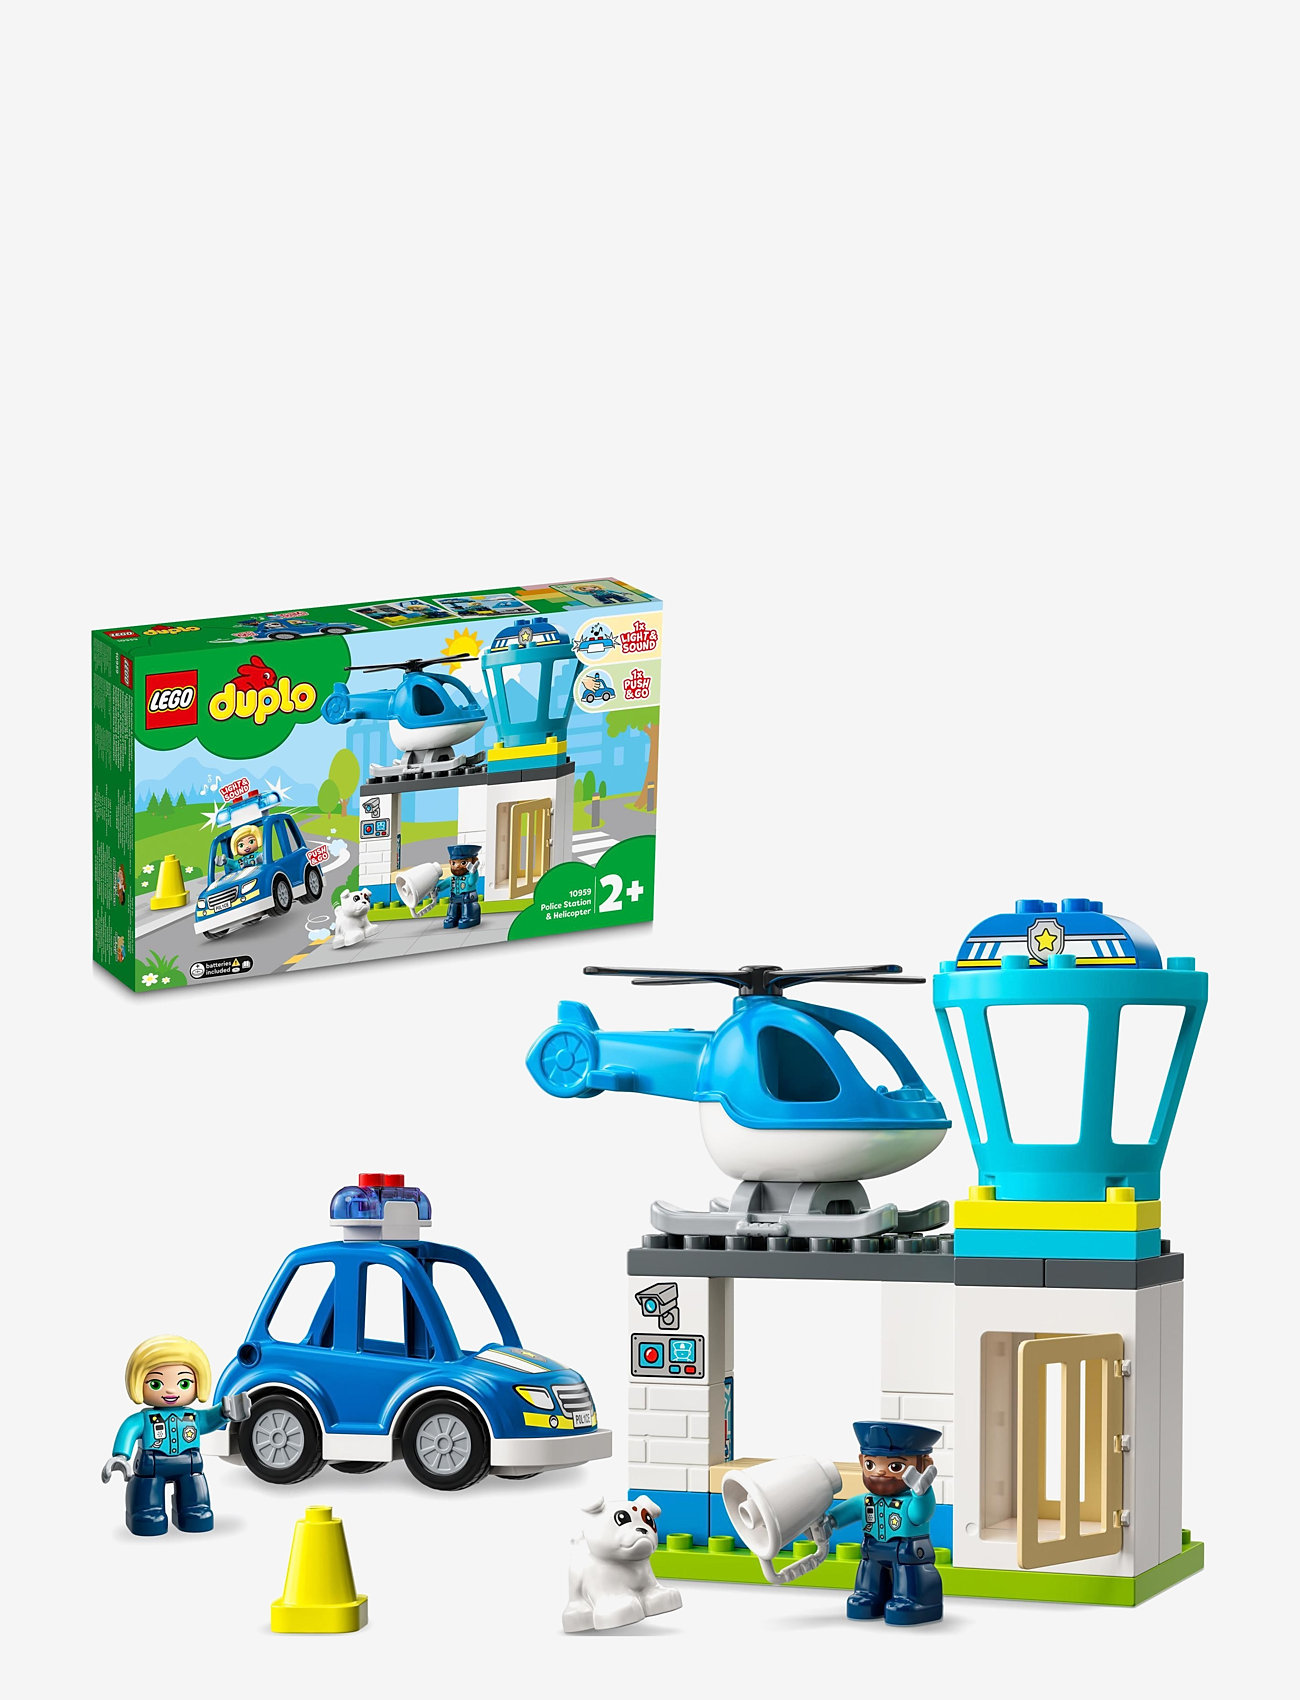 LEGO - Rescue Police Station & Helicopter Toy Set - lego® duplo® - multicolor - 0